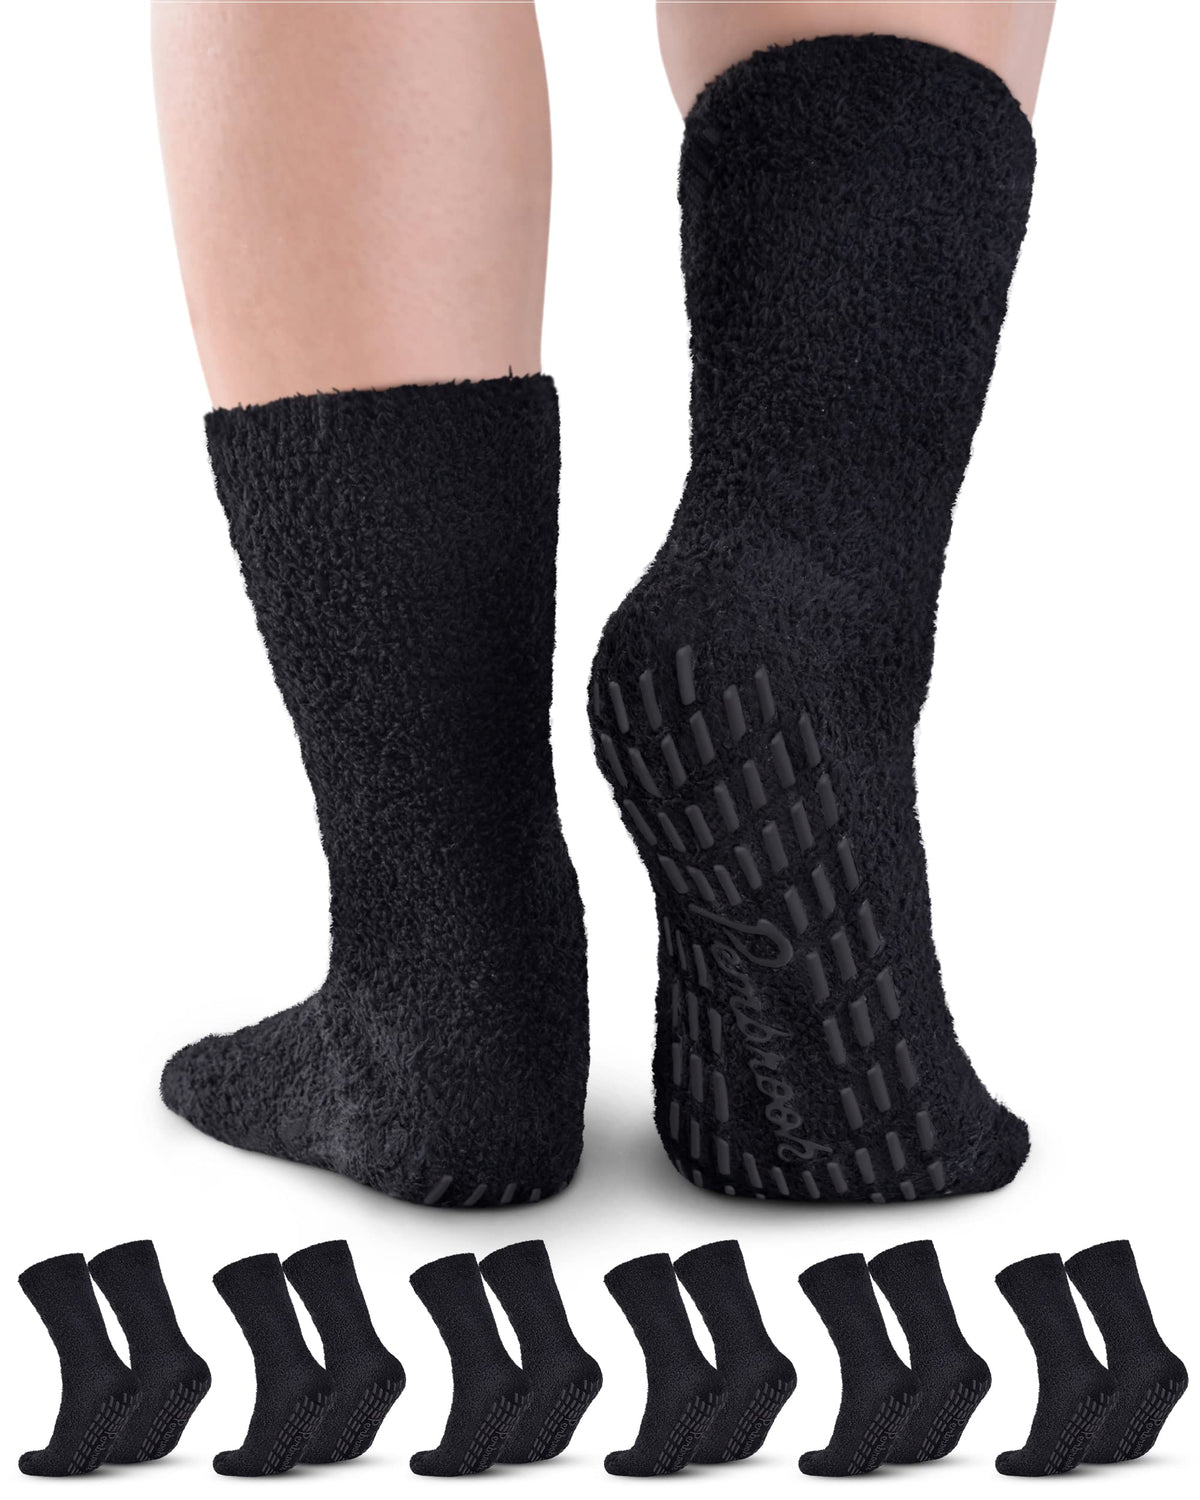 Pembrook Fuzzy Socks with Grips for Women and Men - 6 Pairs Non